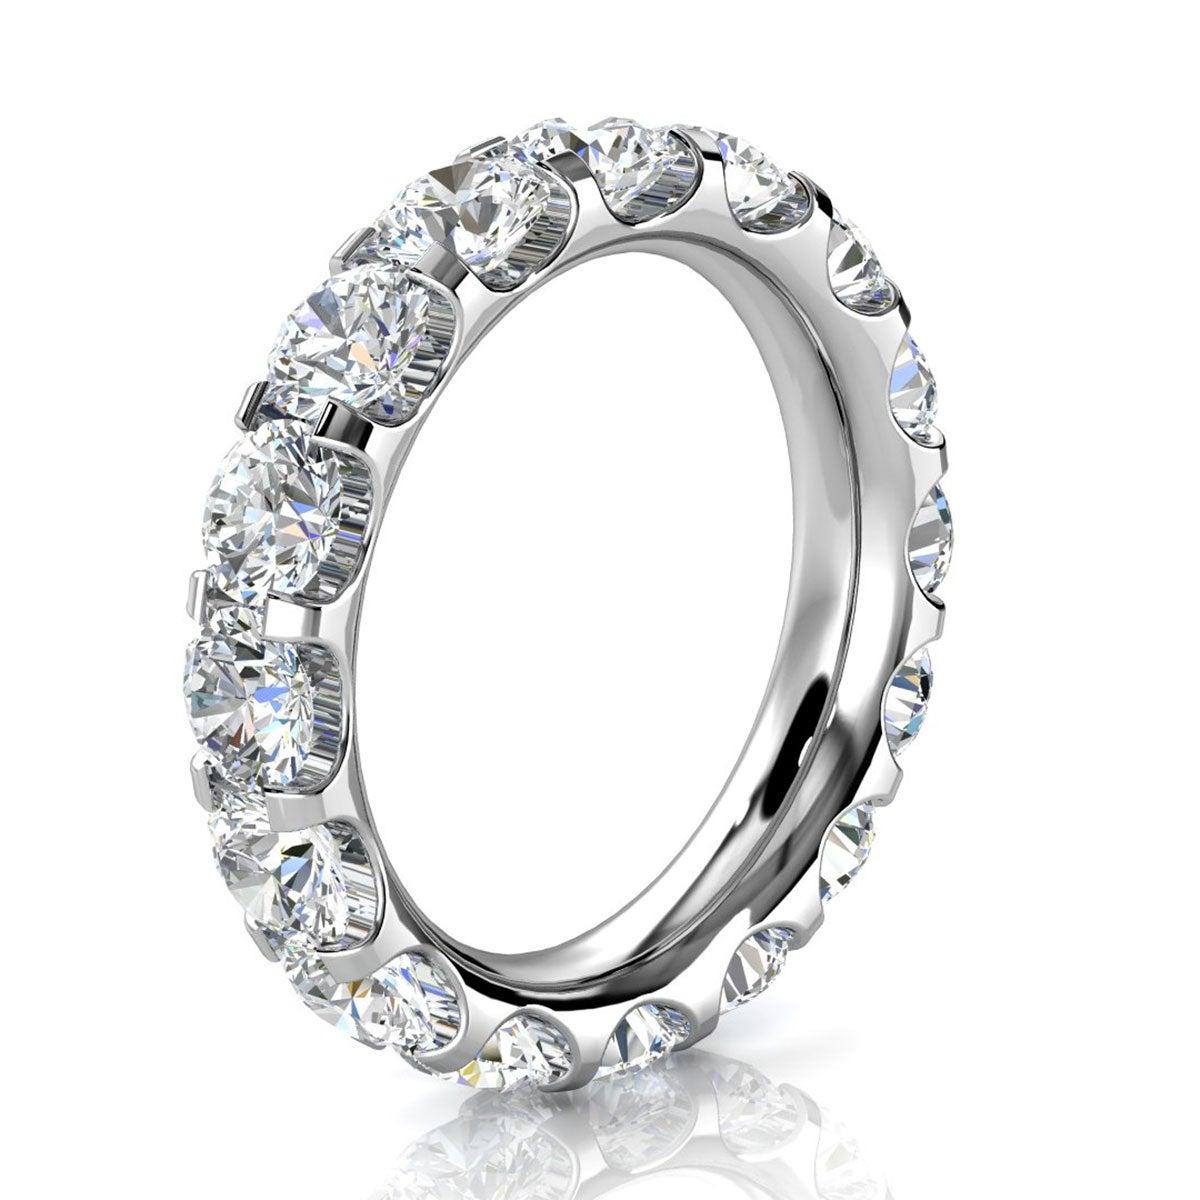 For Sale:  18k White Gold Viola Eternity Micro-Prong Diamond Ring '4 Ct. tw' 2